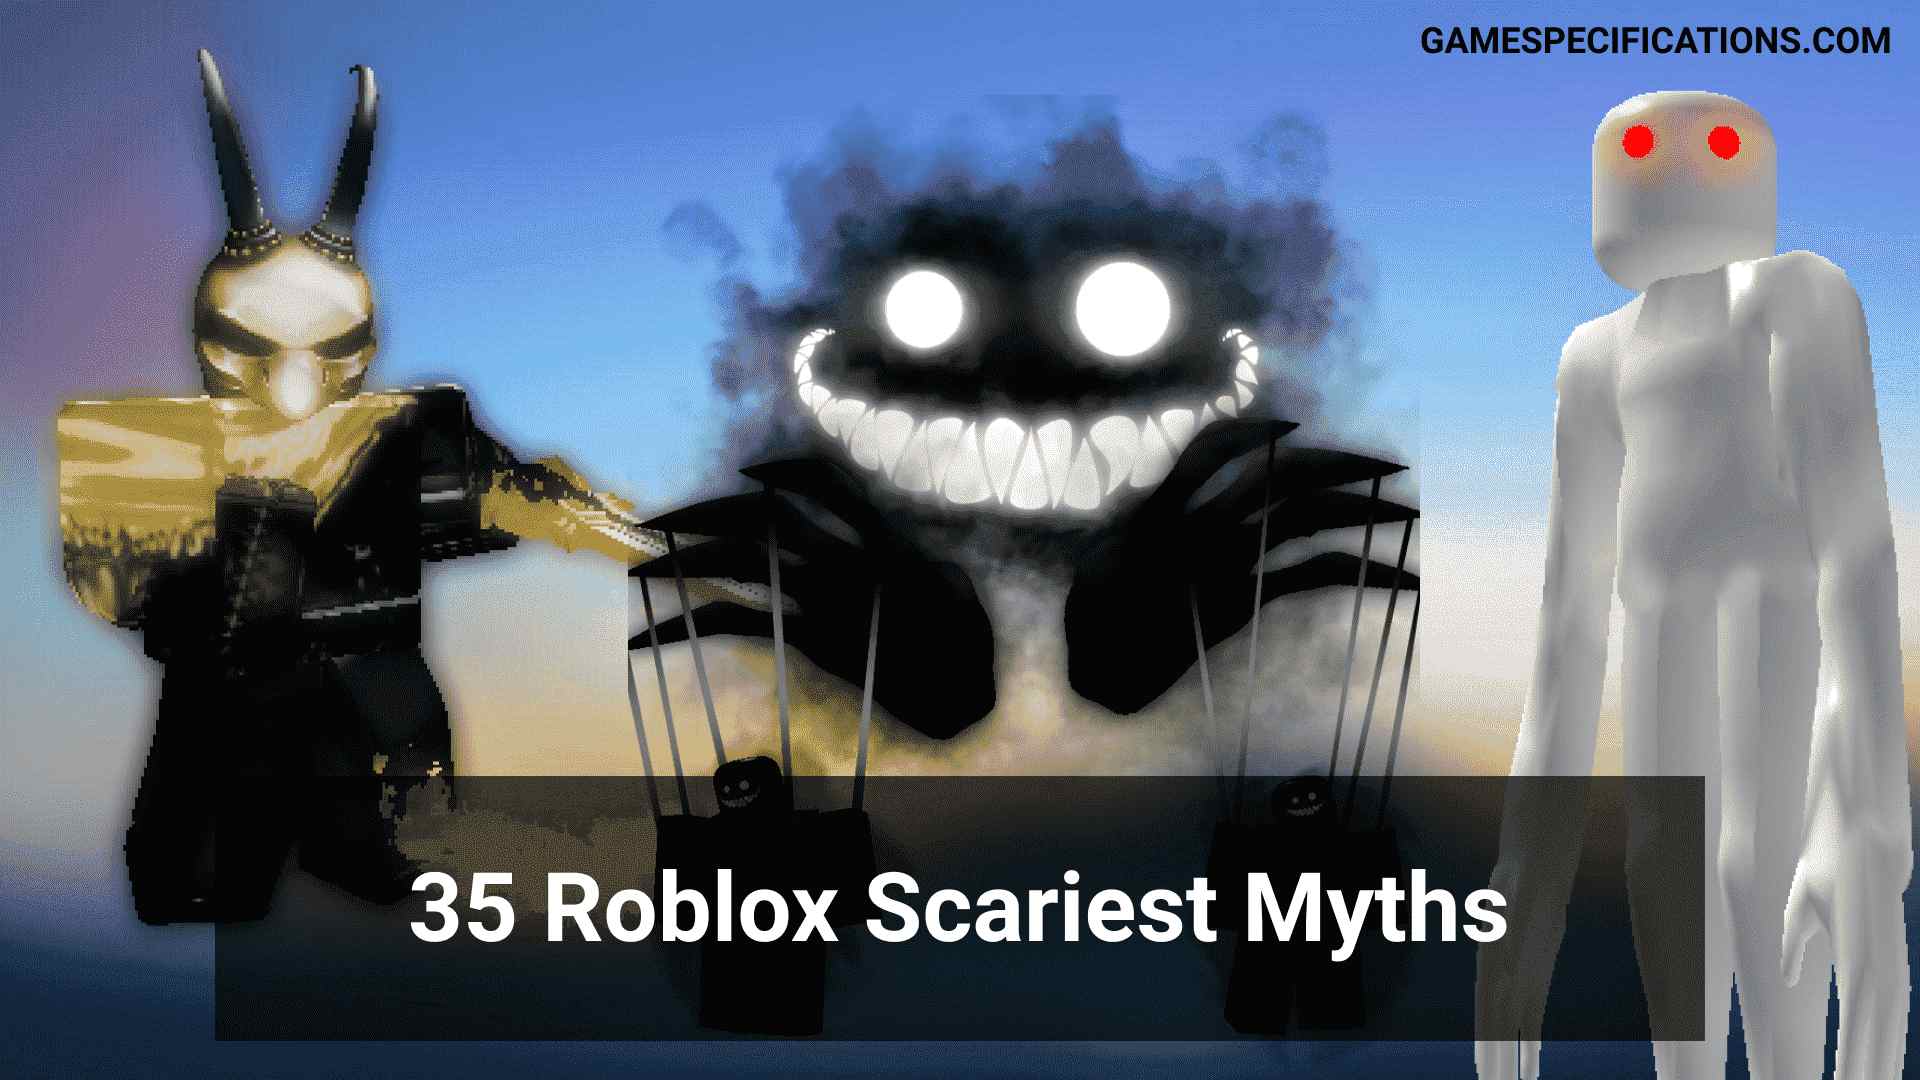 Roblox Myths A Scary Universe Of Roblox Game Specifications - red eyes roblox creepypasta